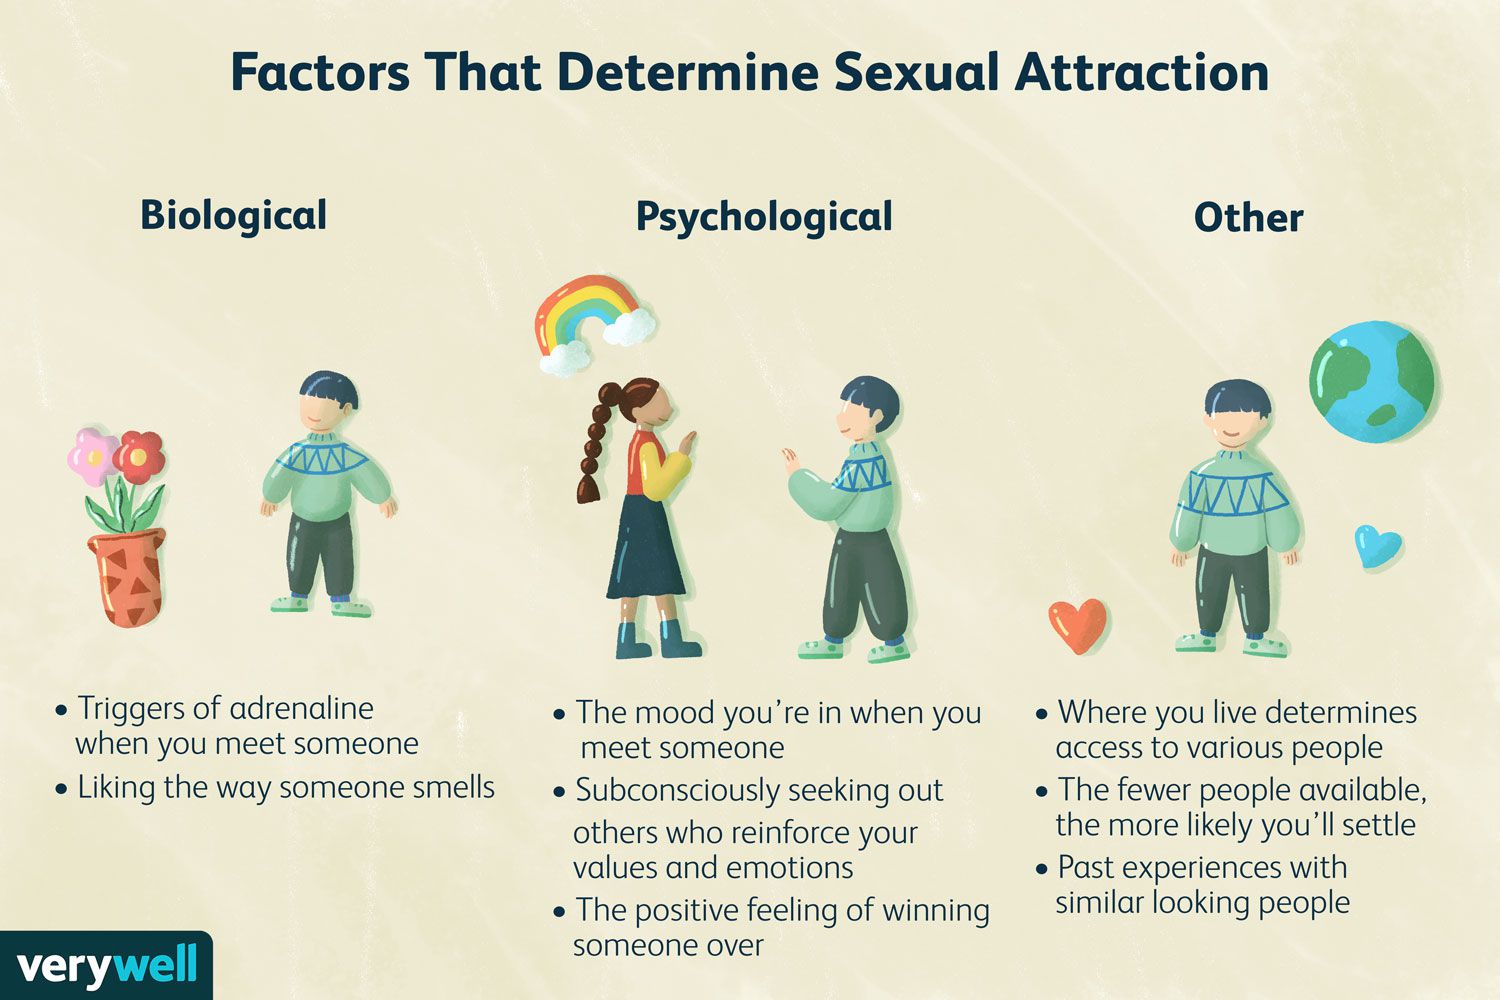 What Determines Sexual Attraction?